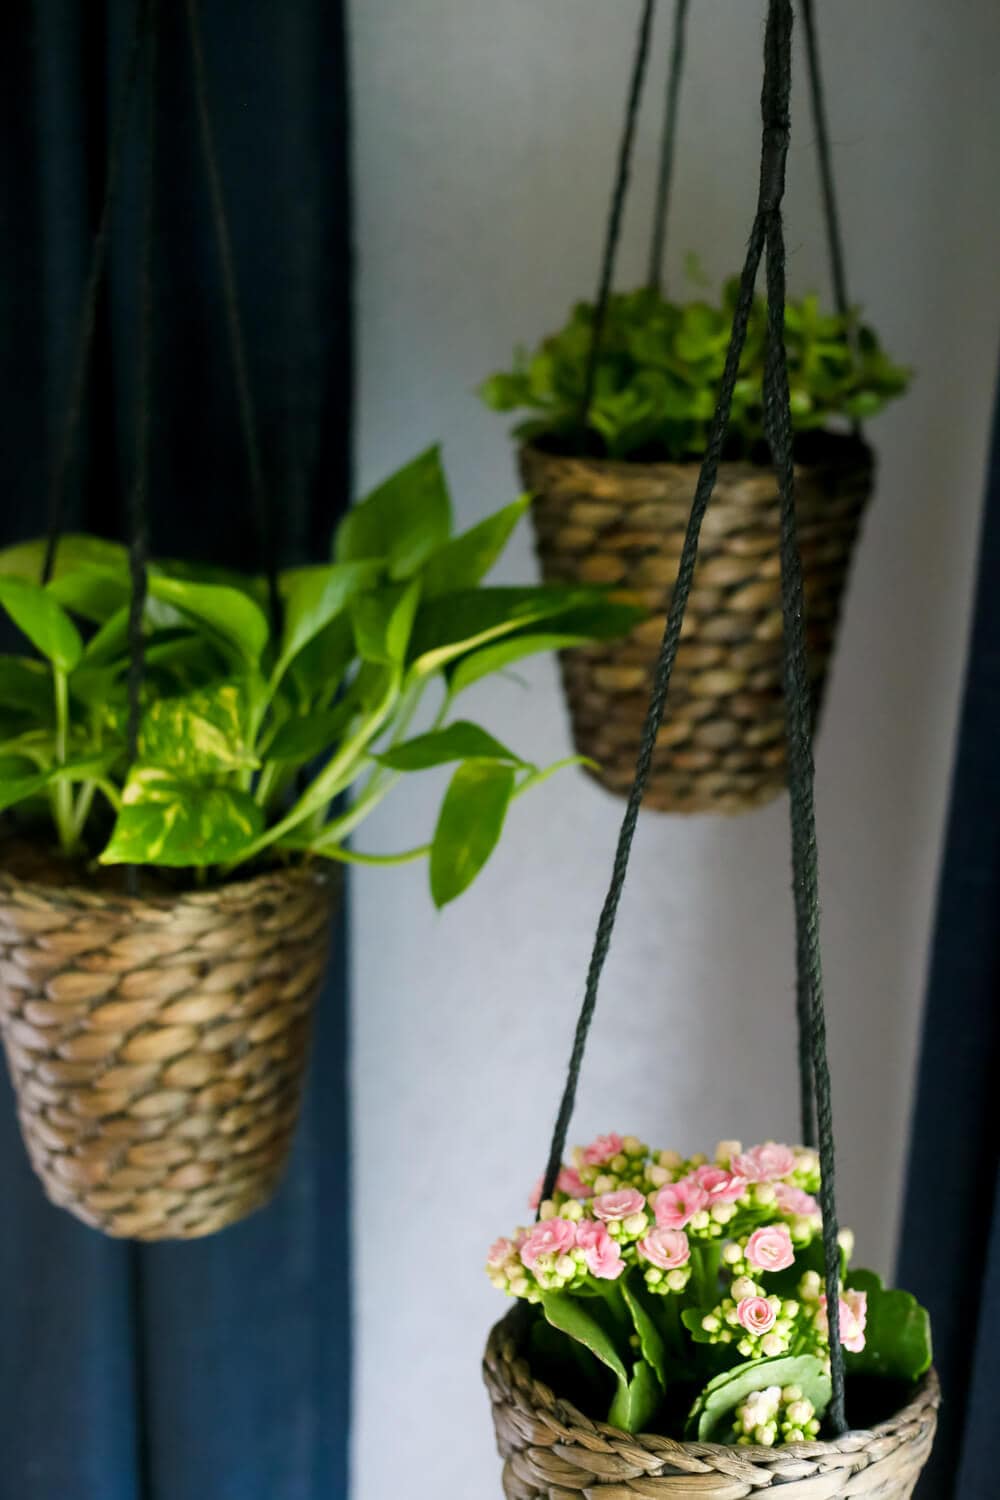 How to add simple hanging planters from IKEA to create this DIY indoor hanging planter display. It's a really simple idea, but makes a big statement in your room! 